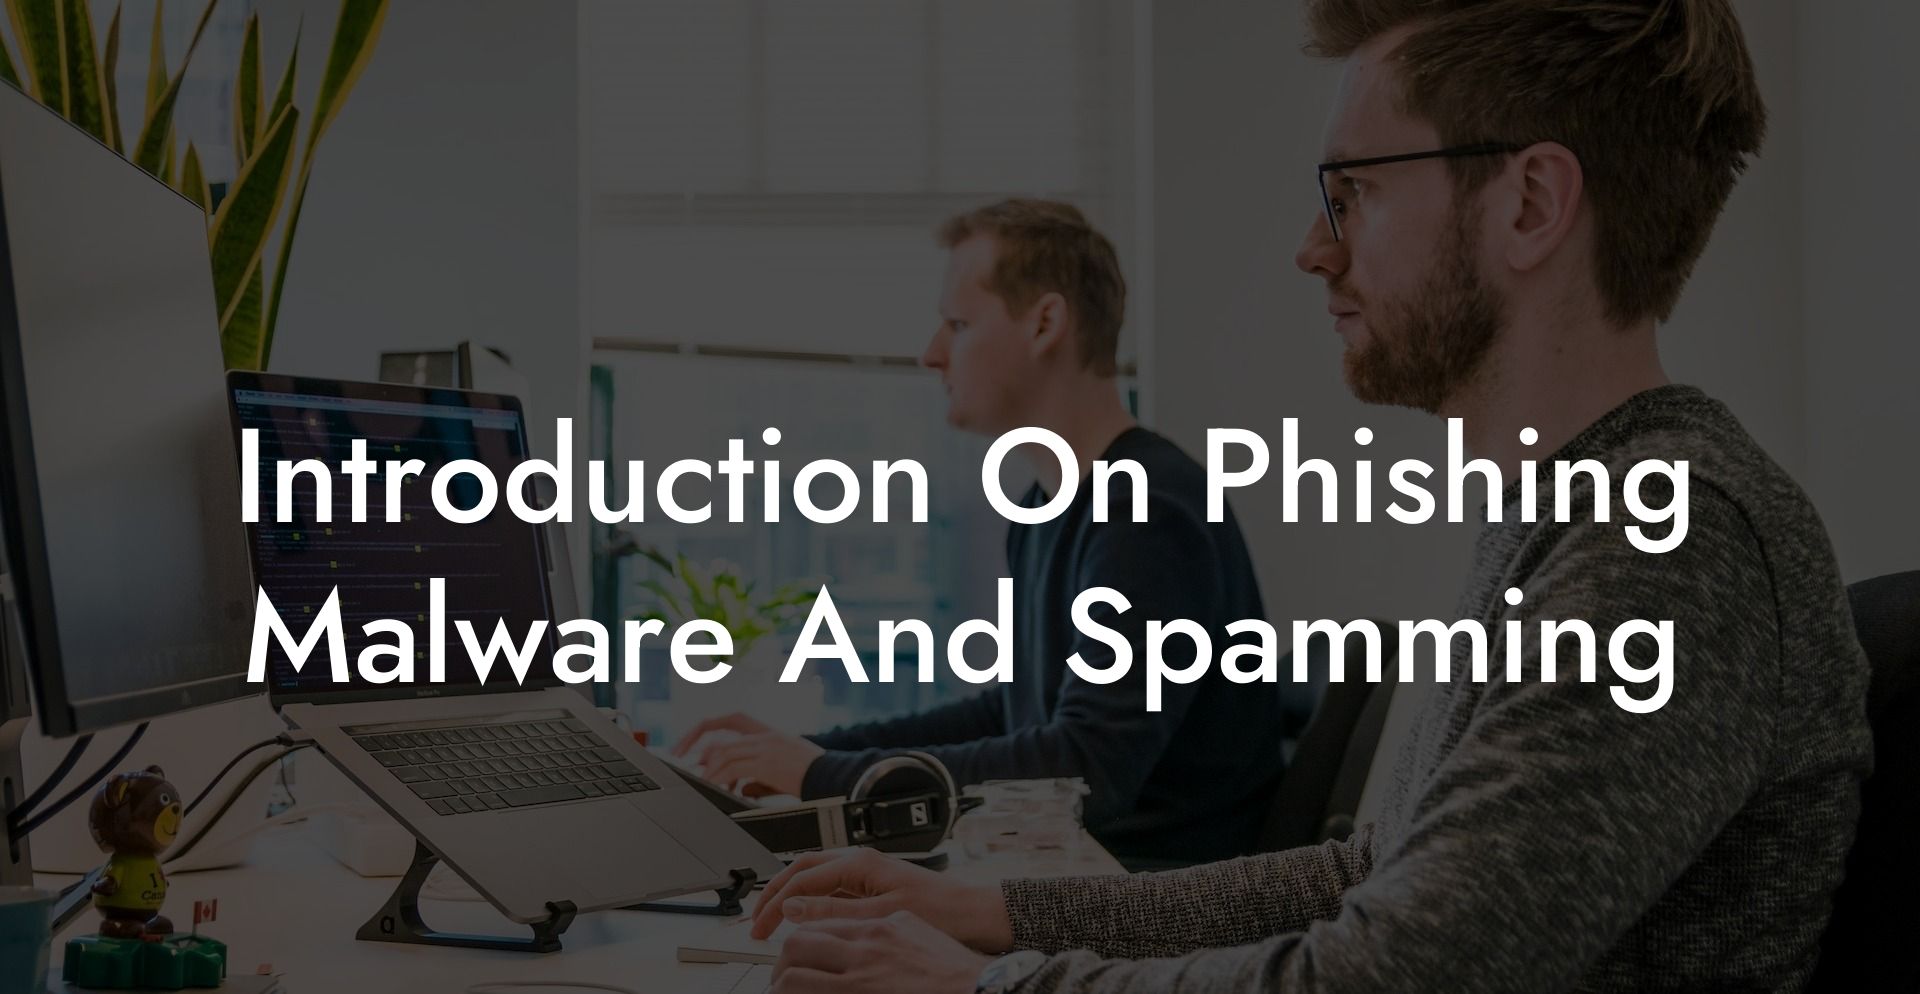 Introduction On Phishing Malware And Spamming